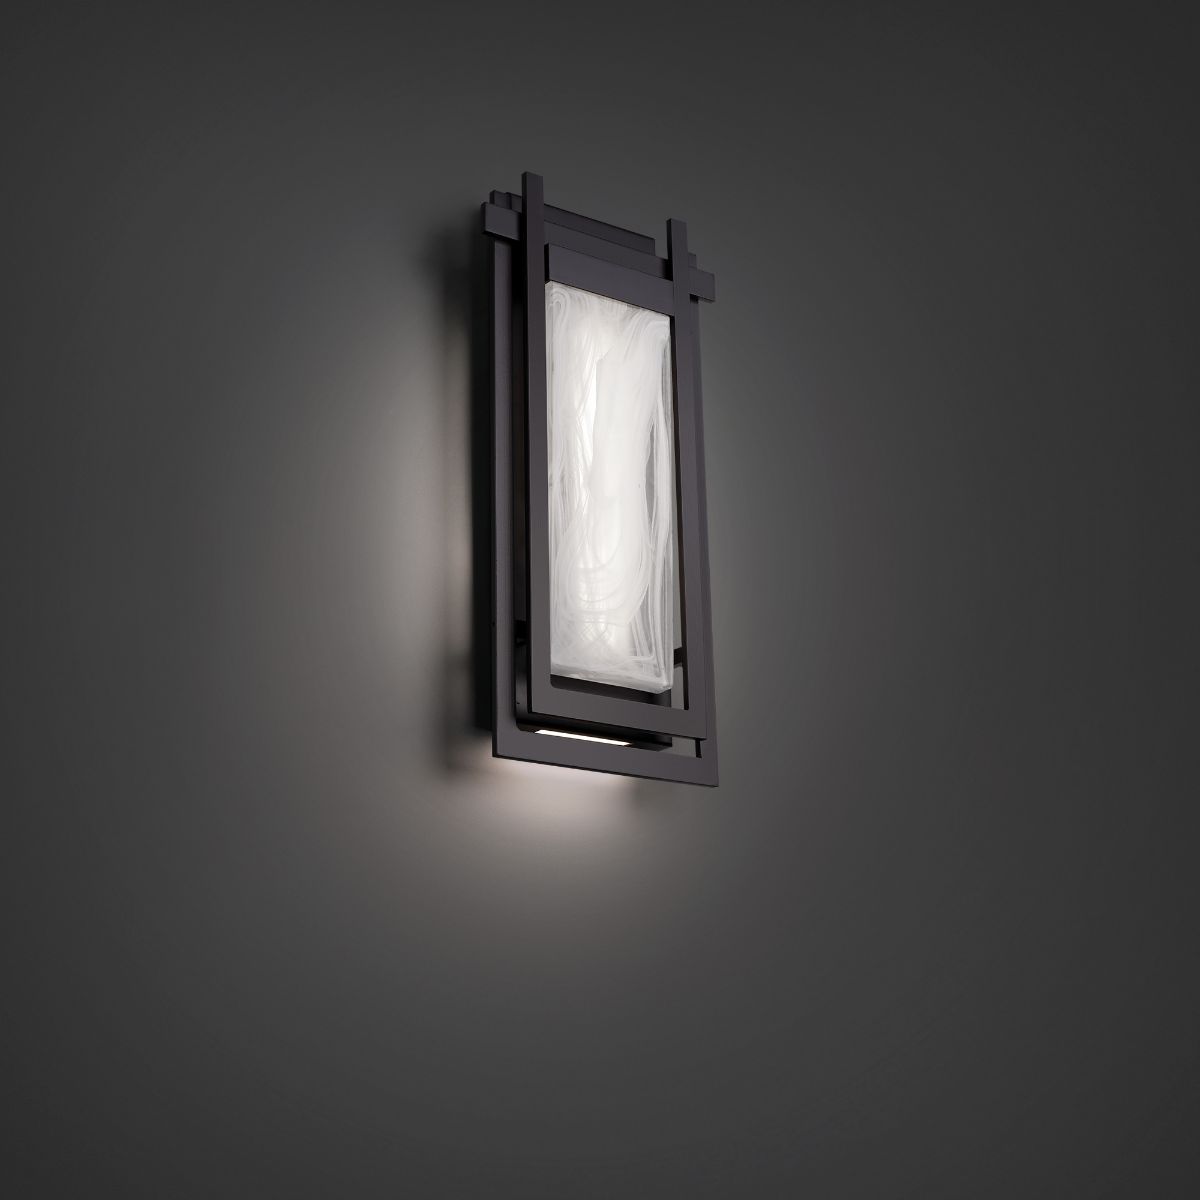 Haze 16 In. LED Outdoor Wall Sconce Black Finish